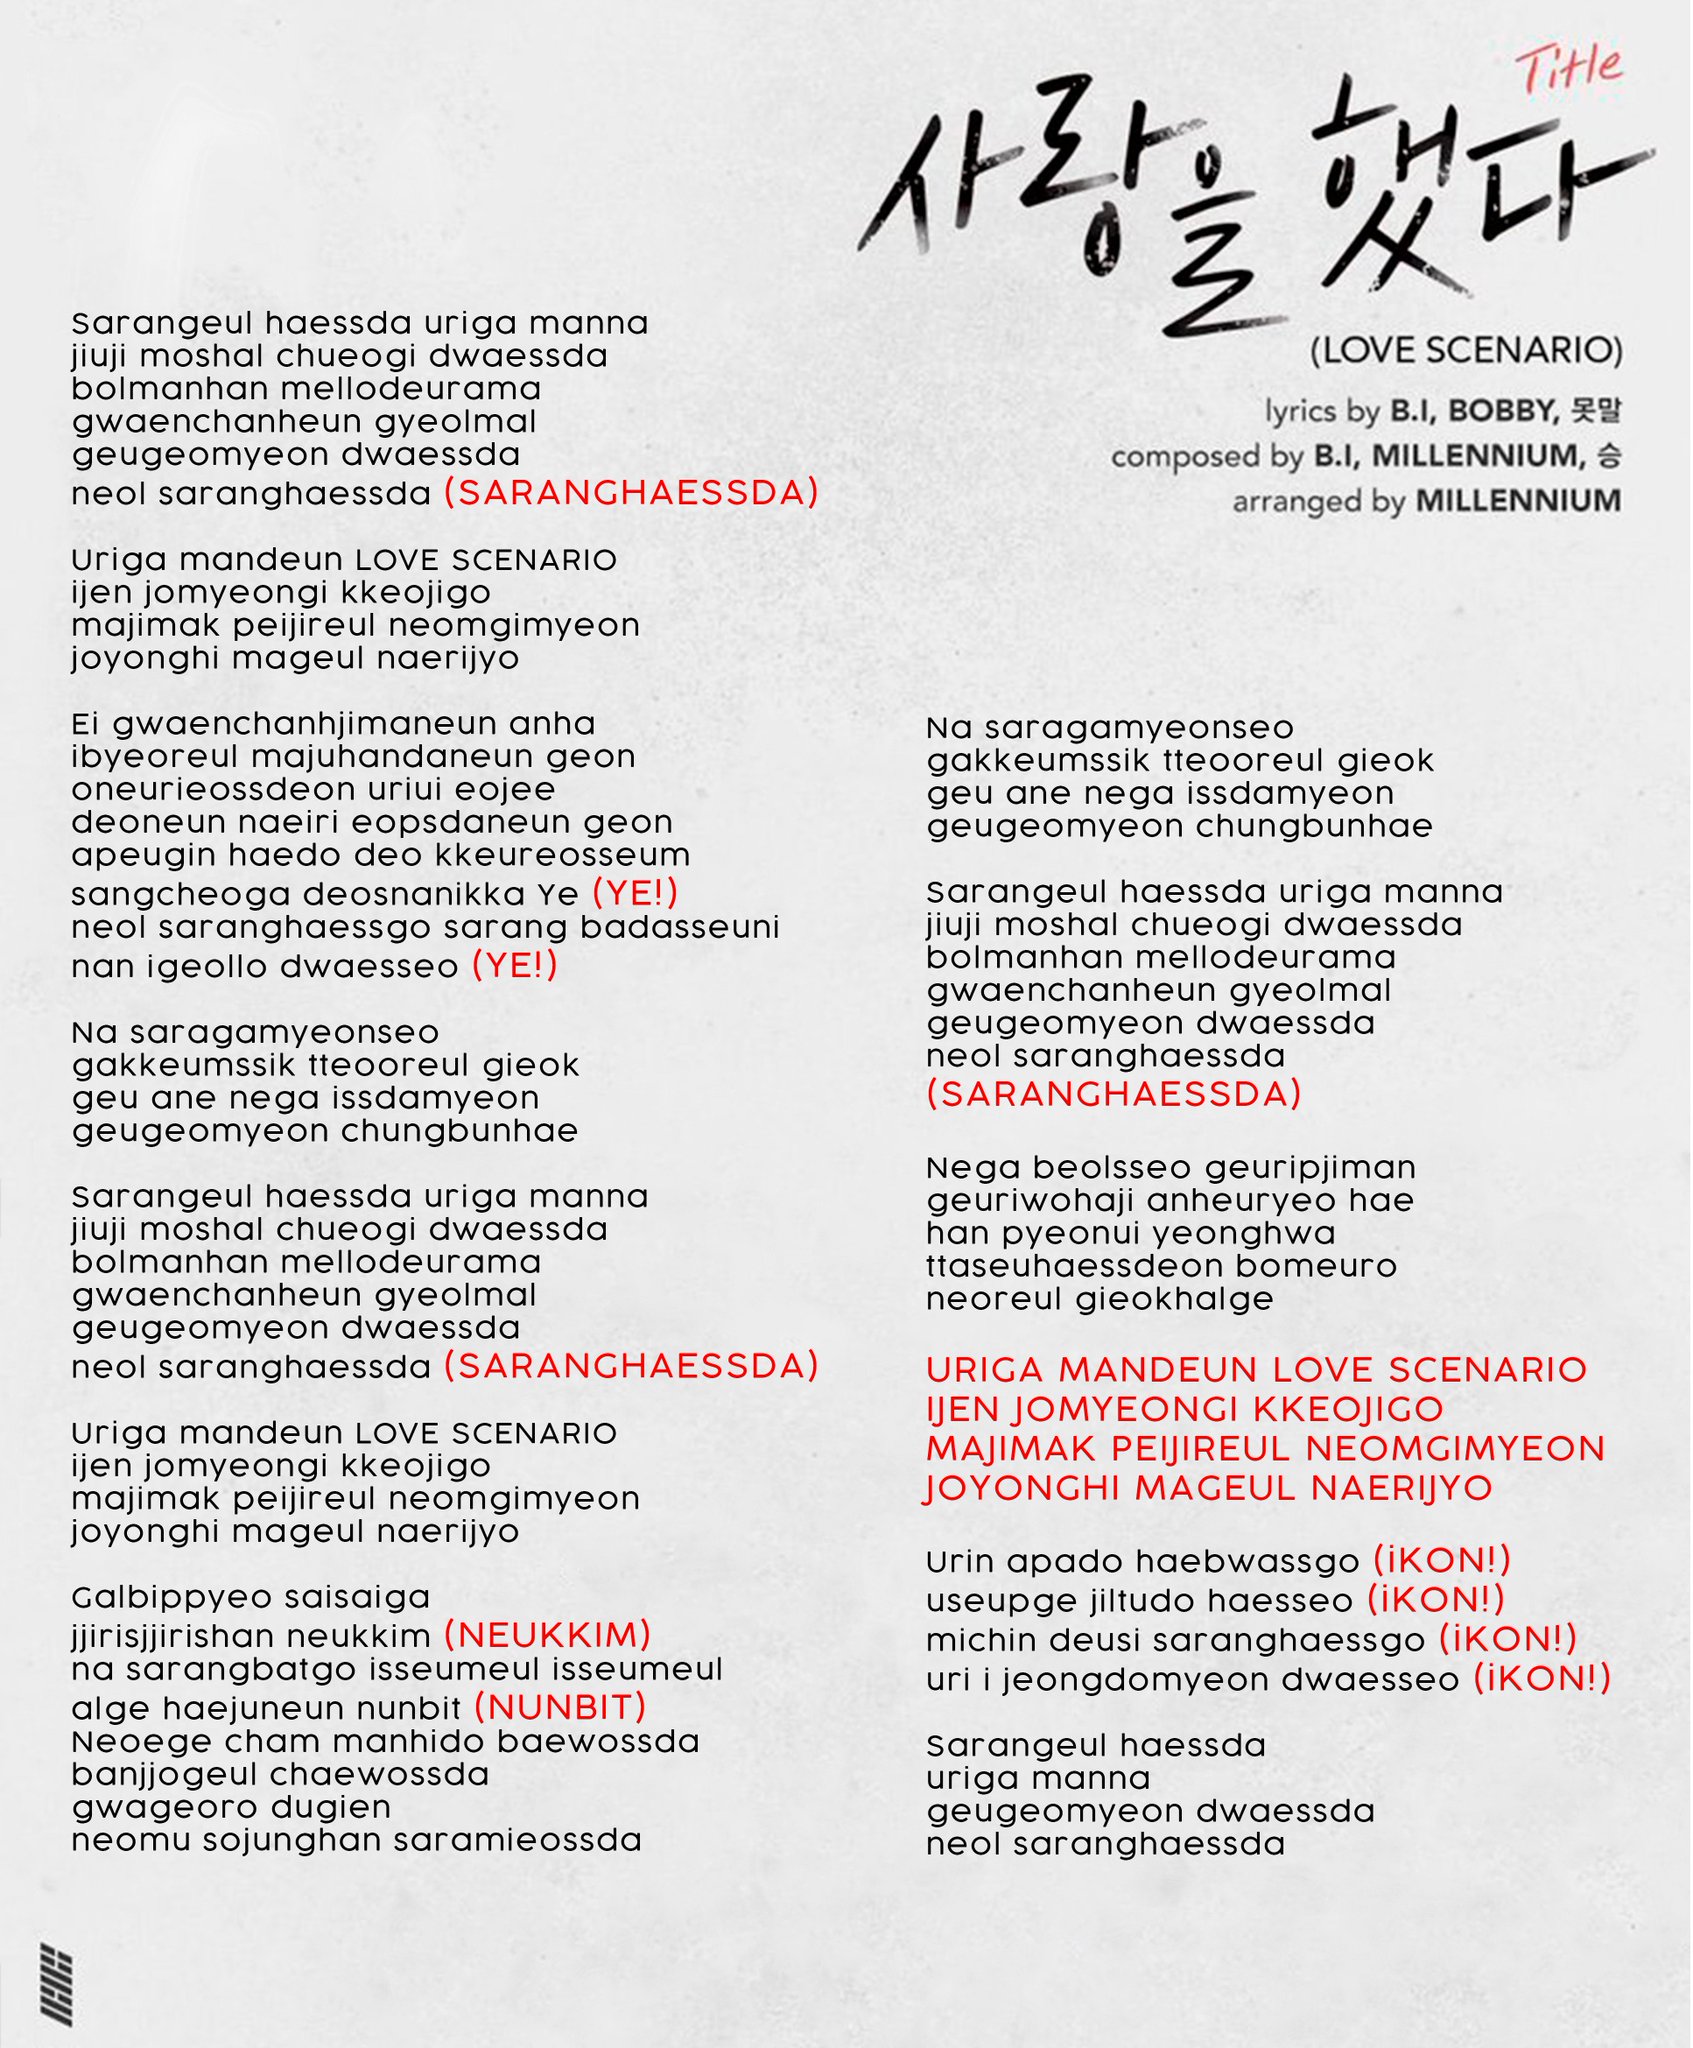 A Love Scenario Fanchant Guide This One Photo Is Not Mine You Can Practice With This Video As Guide T Co Pvybc7wiym Ikoninmanila Ikon T Co Sqyjtplpoz Twitter